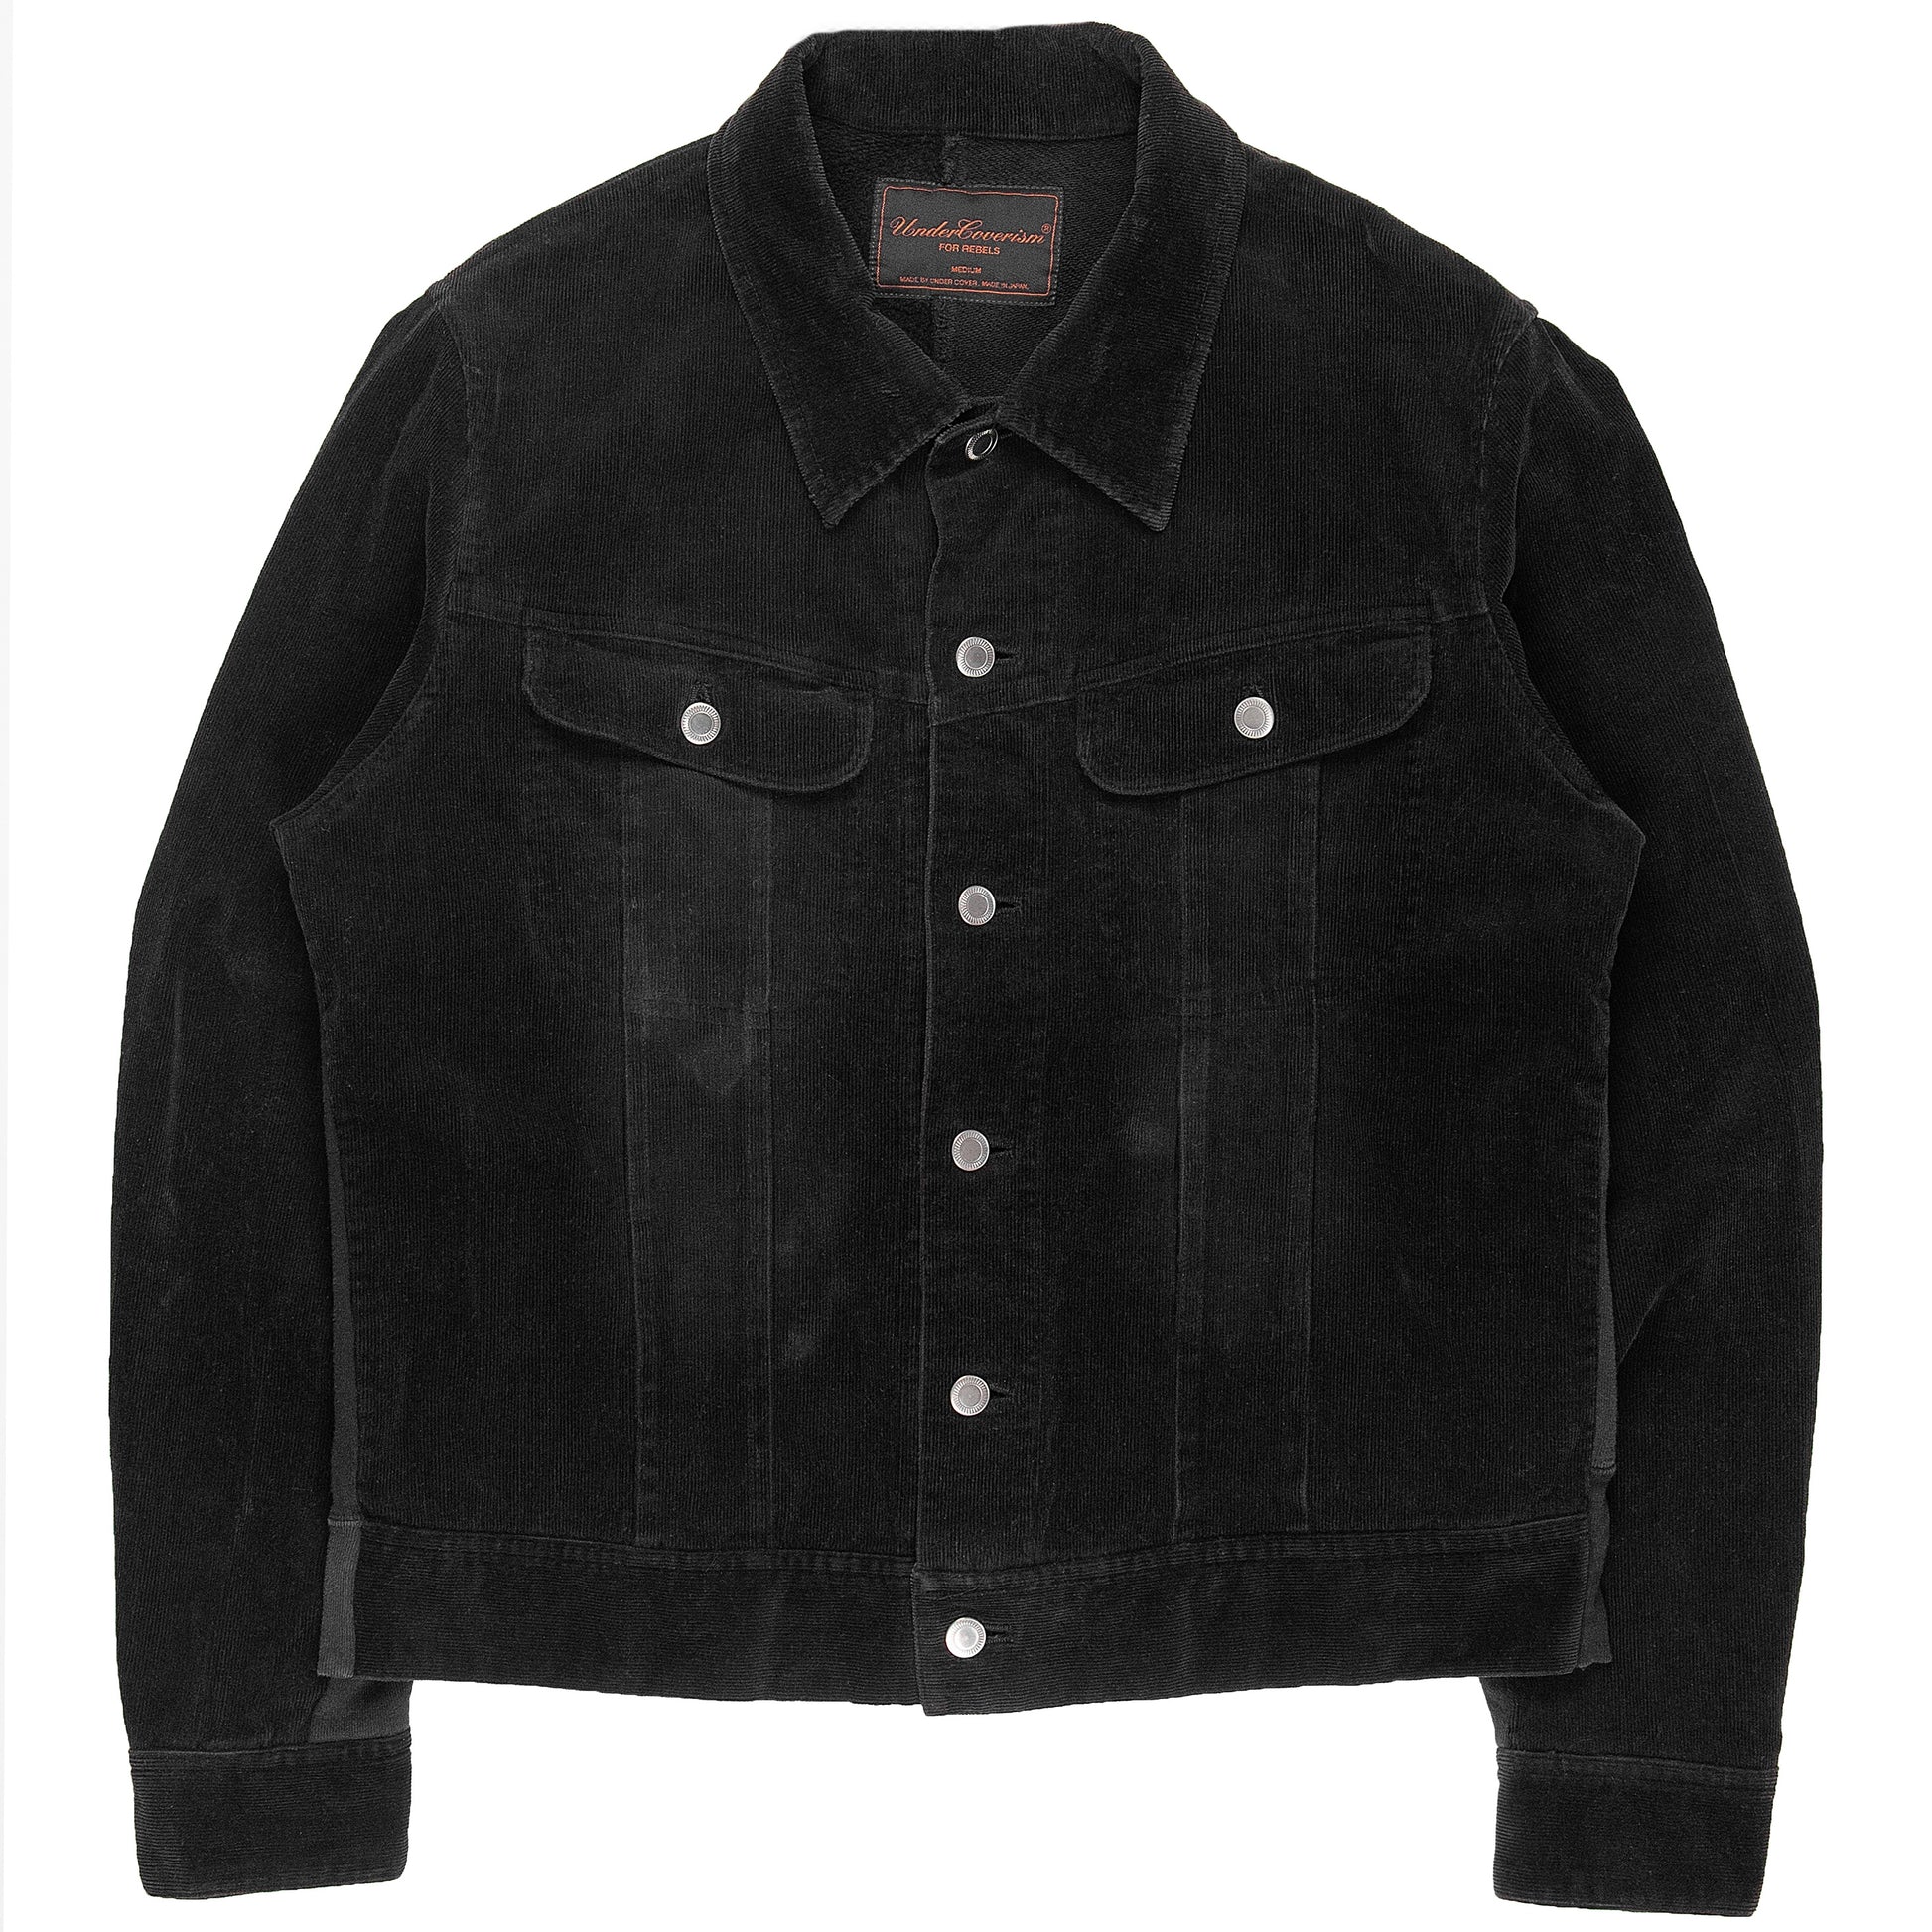 Undercover Reconstructed Hybrid Trucker Jacket - AW03 “Paperdoll ...